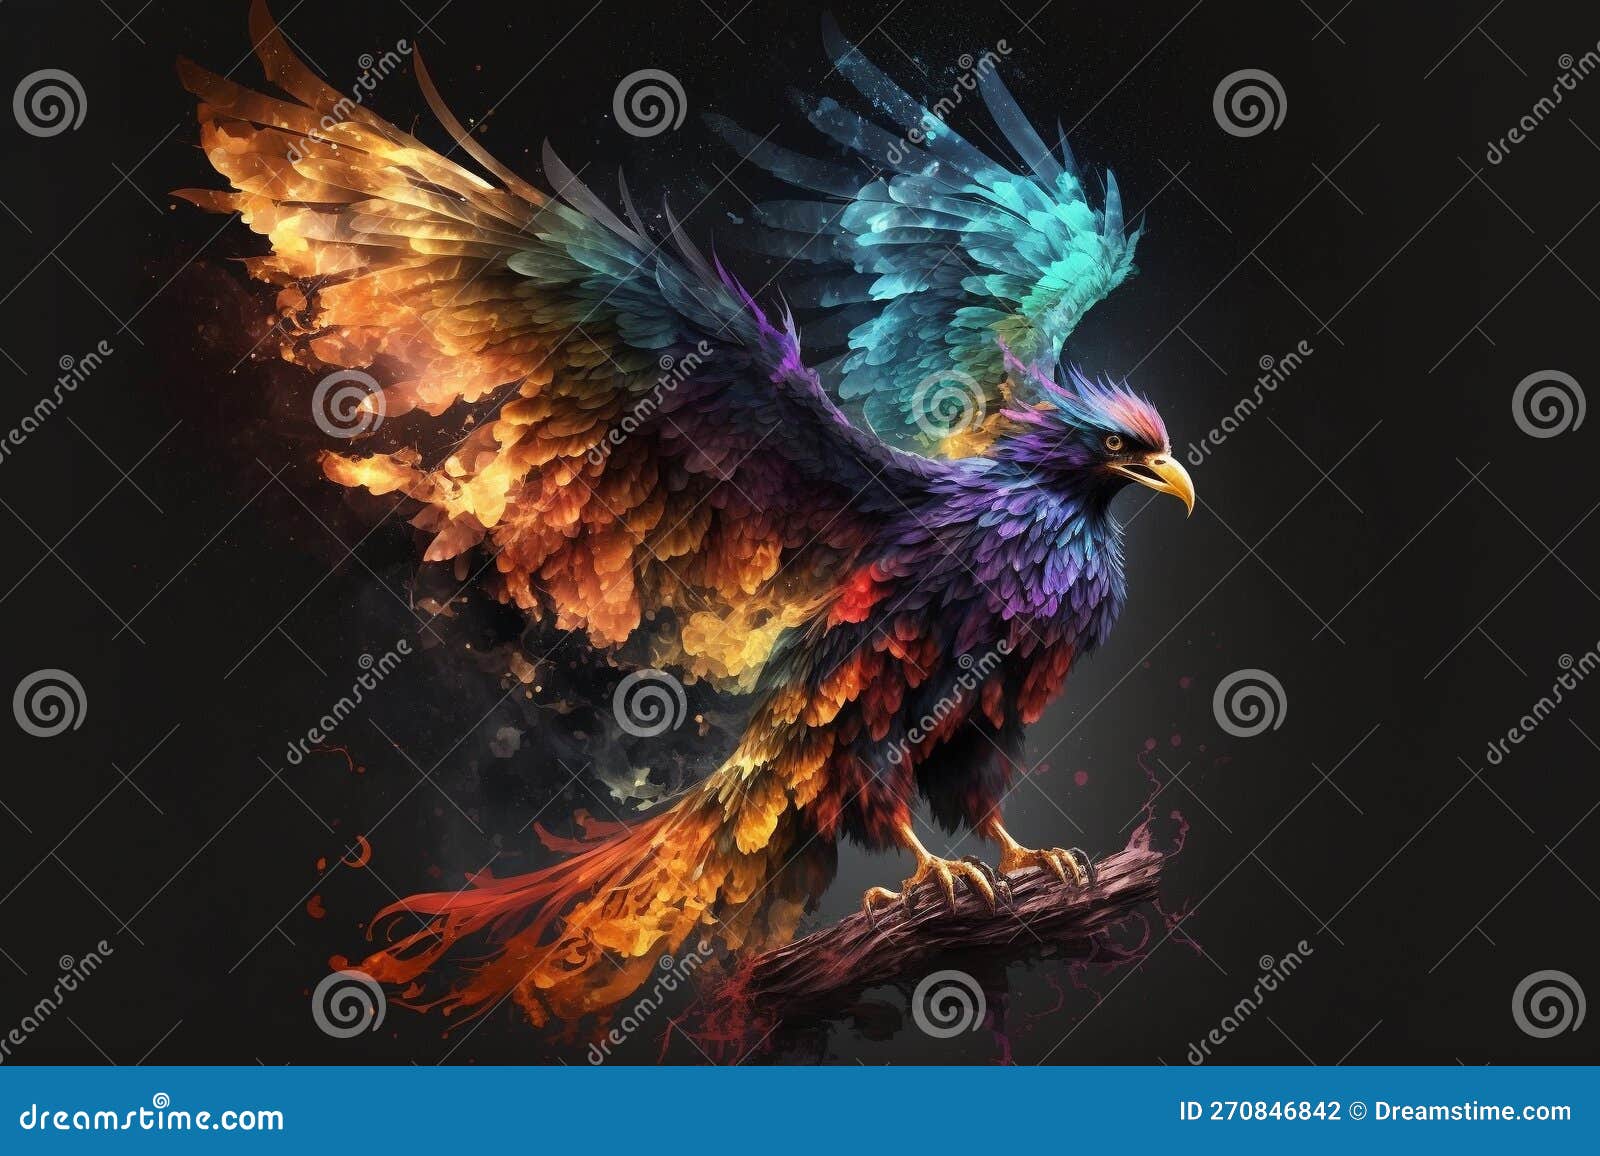 Phoenix Fantastic Bird with Vibrant Colors of the Feathers and ...